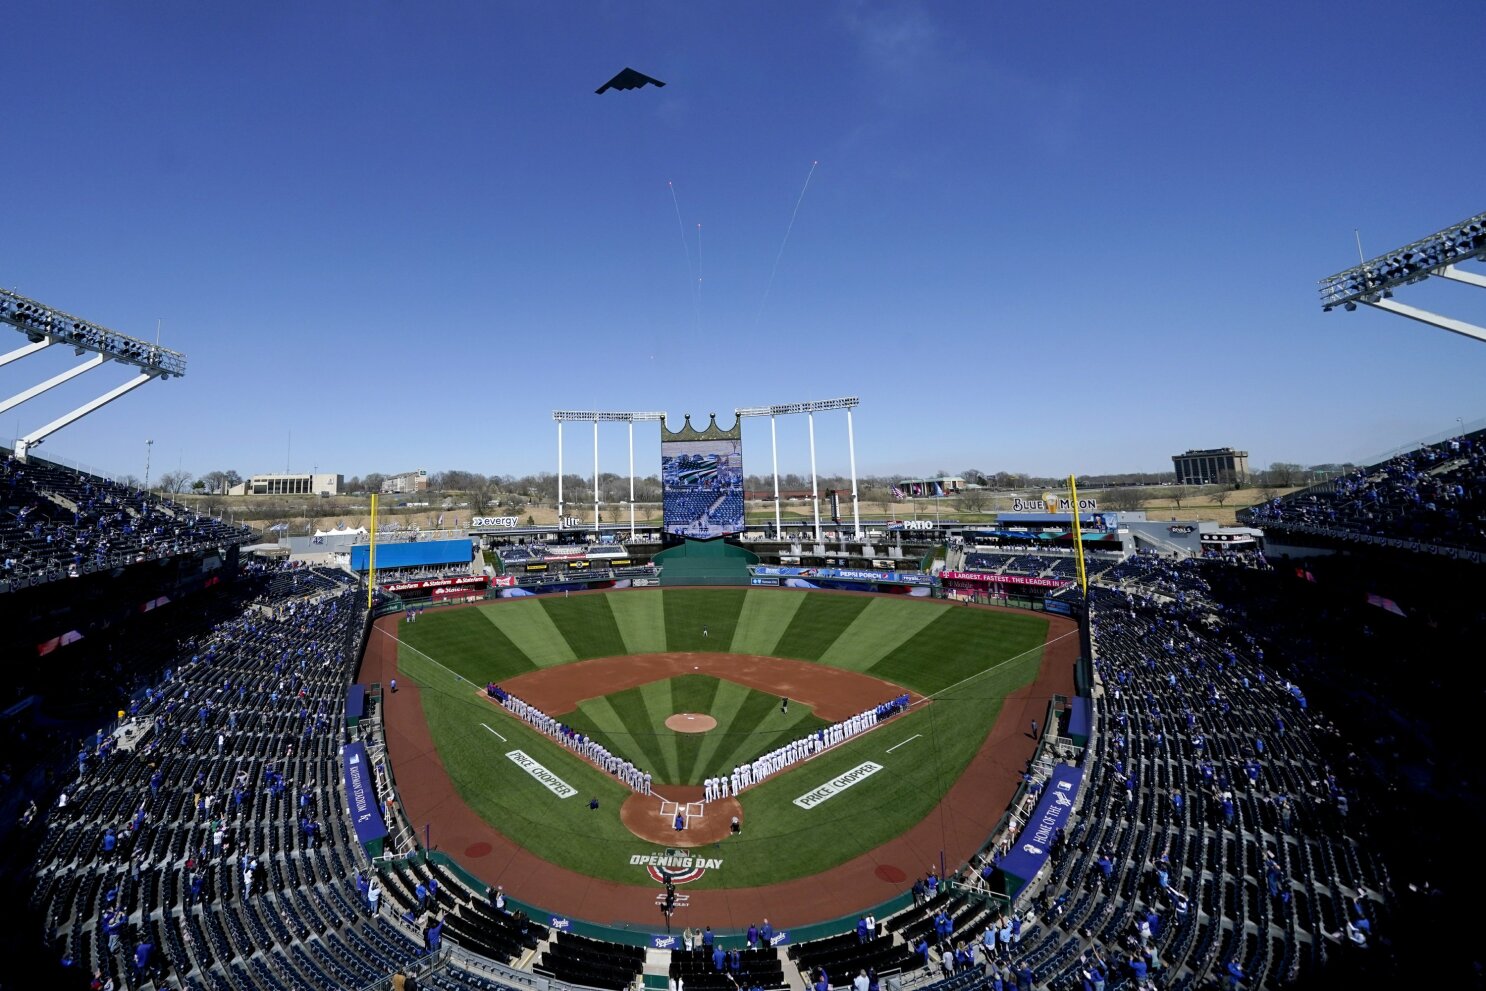 A Stealth bomber flies over Yankee Stadium prior to the start of